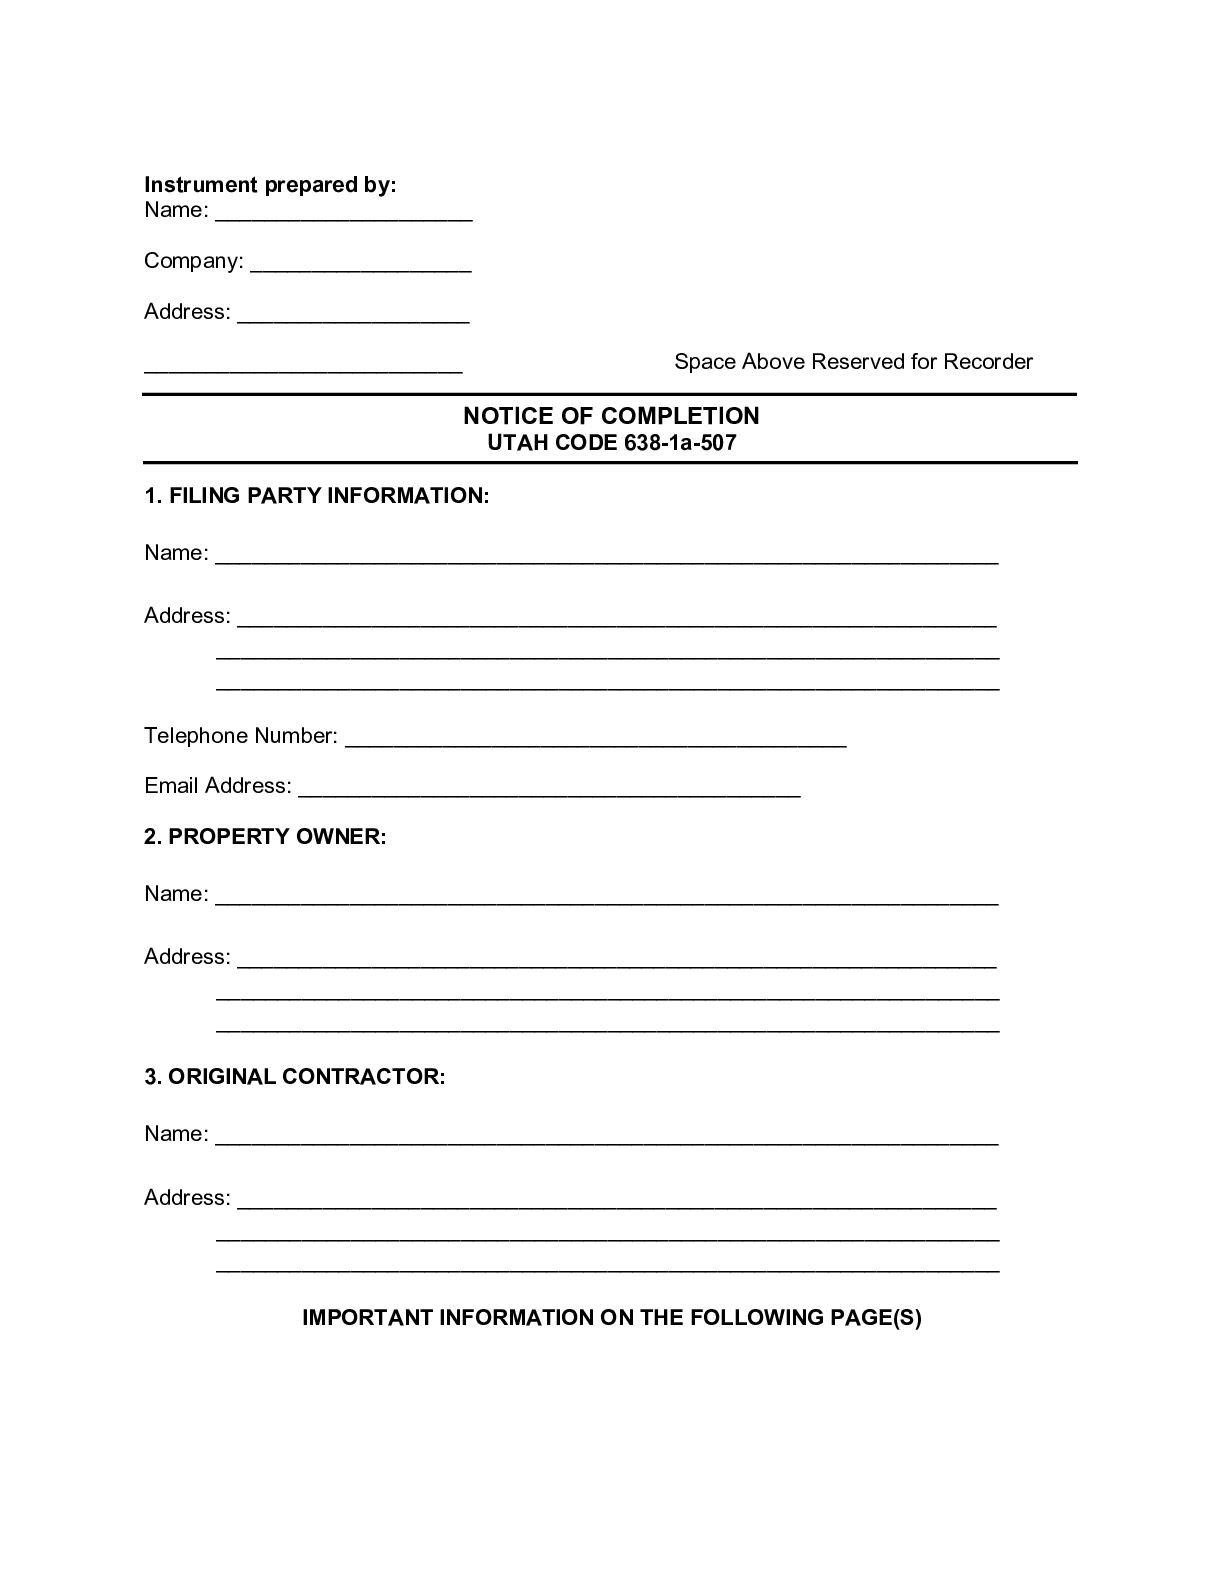 Utah Notice of Completion Form